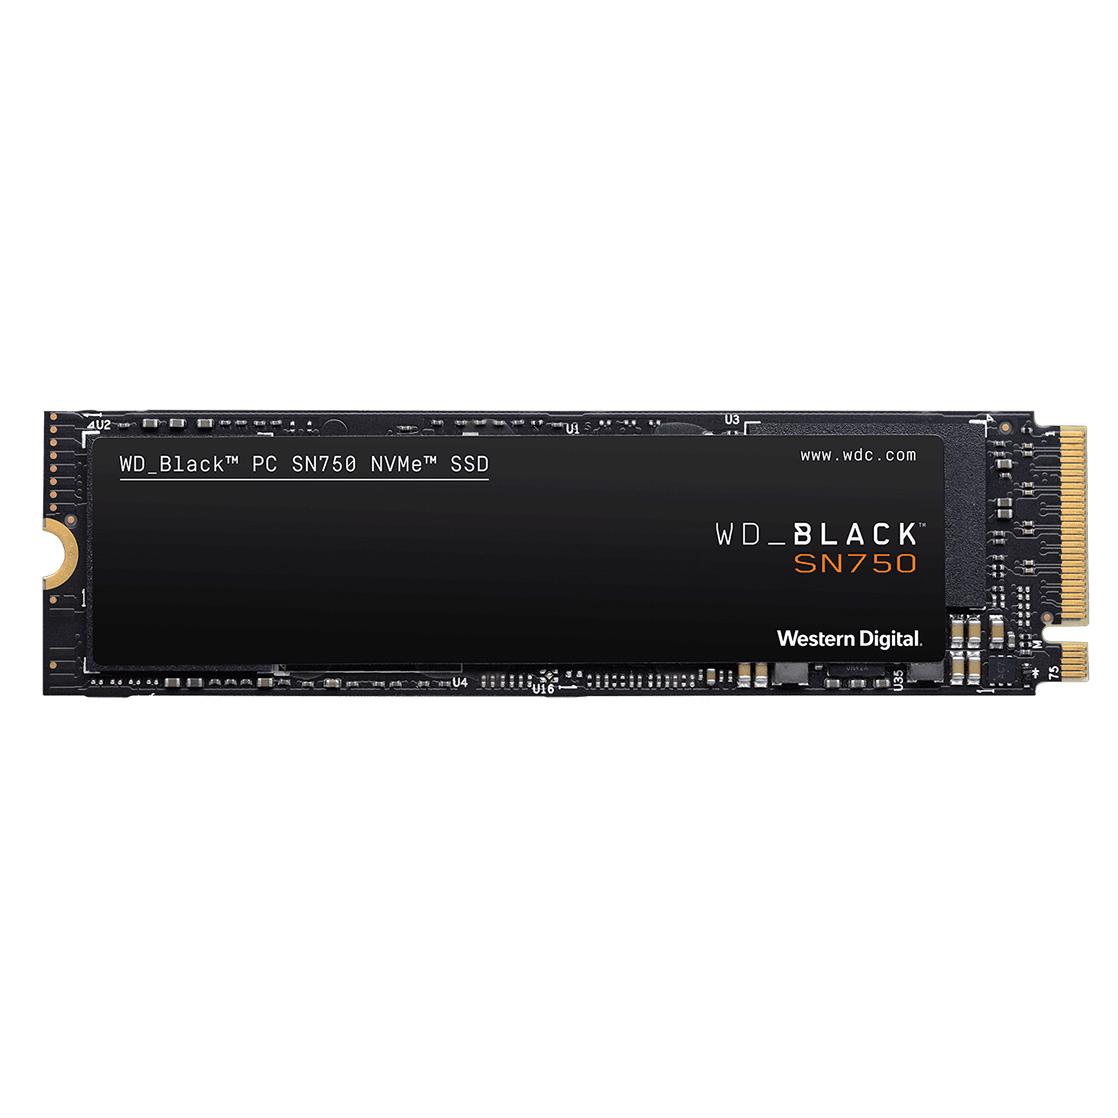 2TB WD Black SN750 NVMe PCIe Internal Solid State Drive for $279.99 Shipped